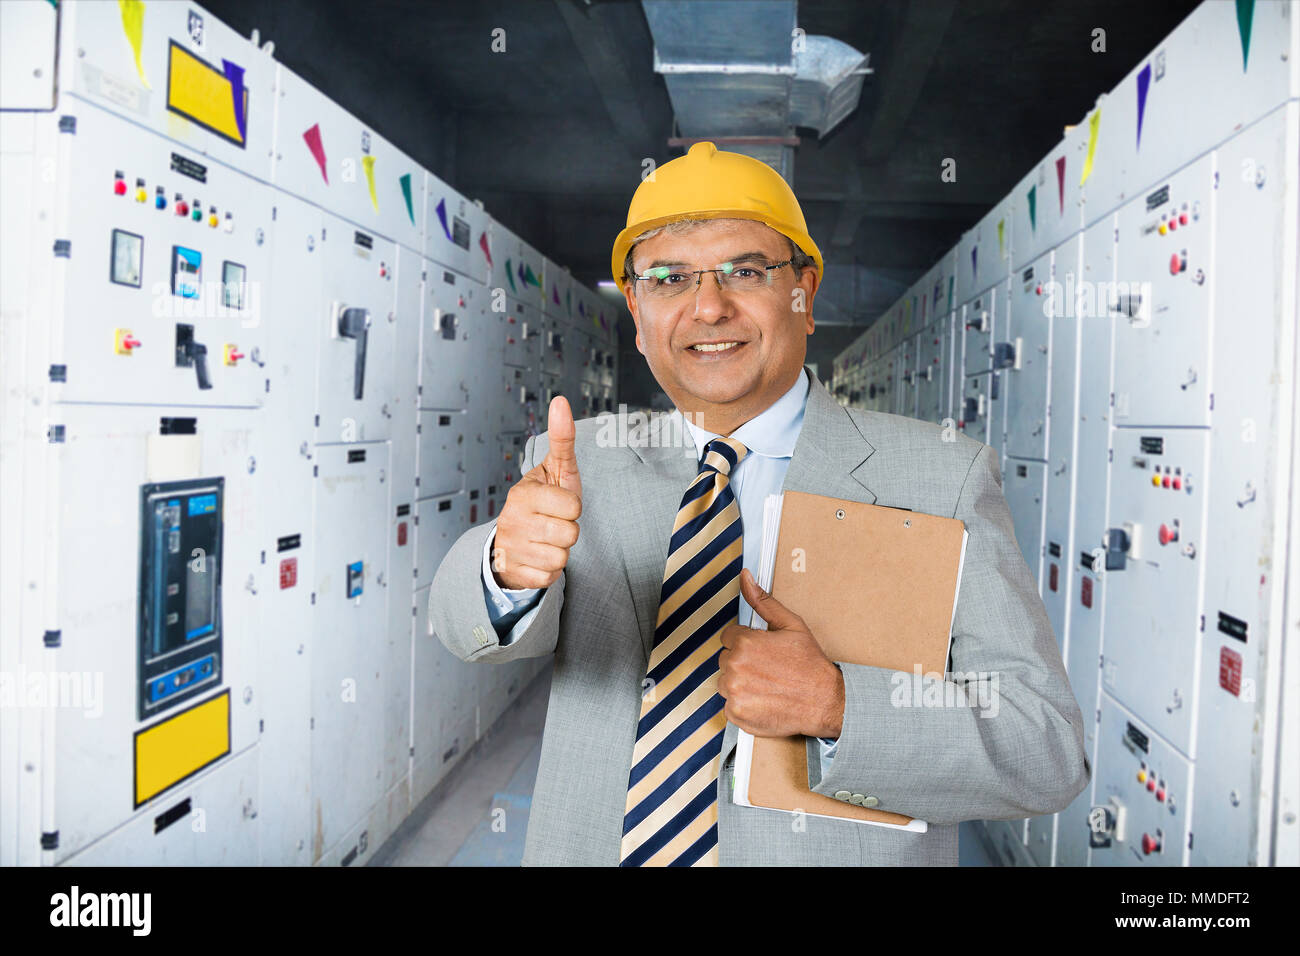 One Man supervisor holding clipboard Showing Thumbs-up Near Machine In Factory- Industry Stock Photo